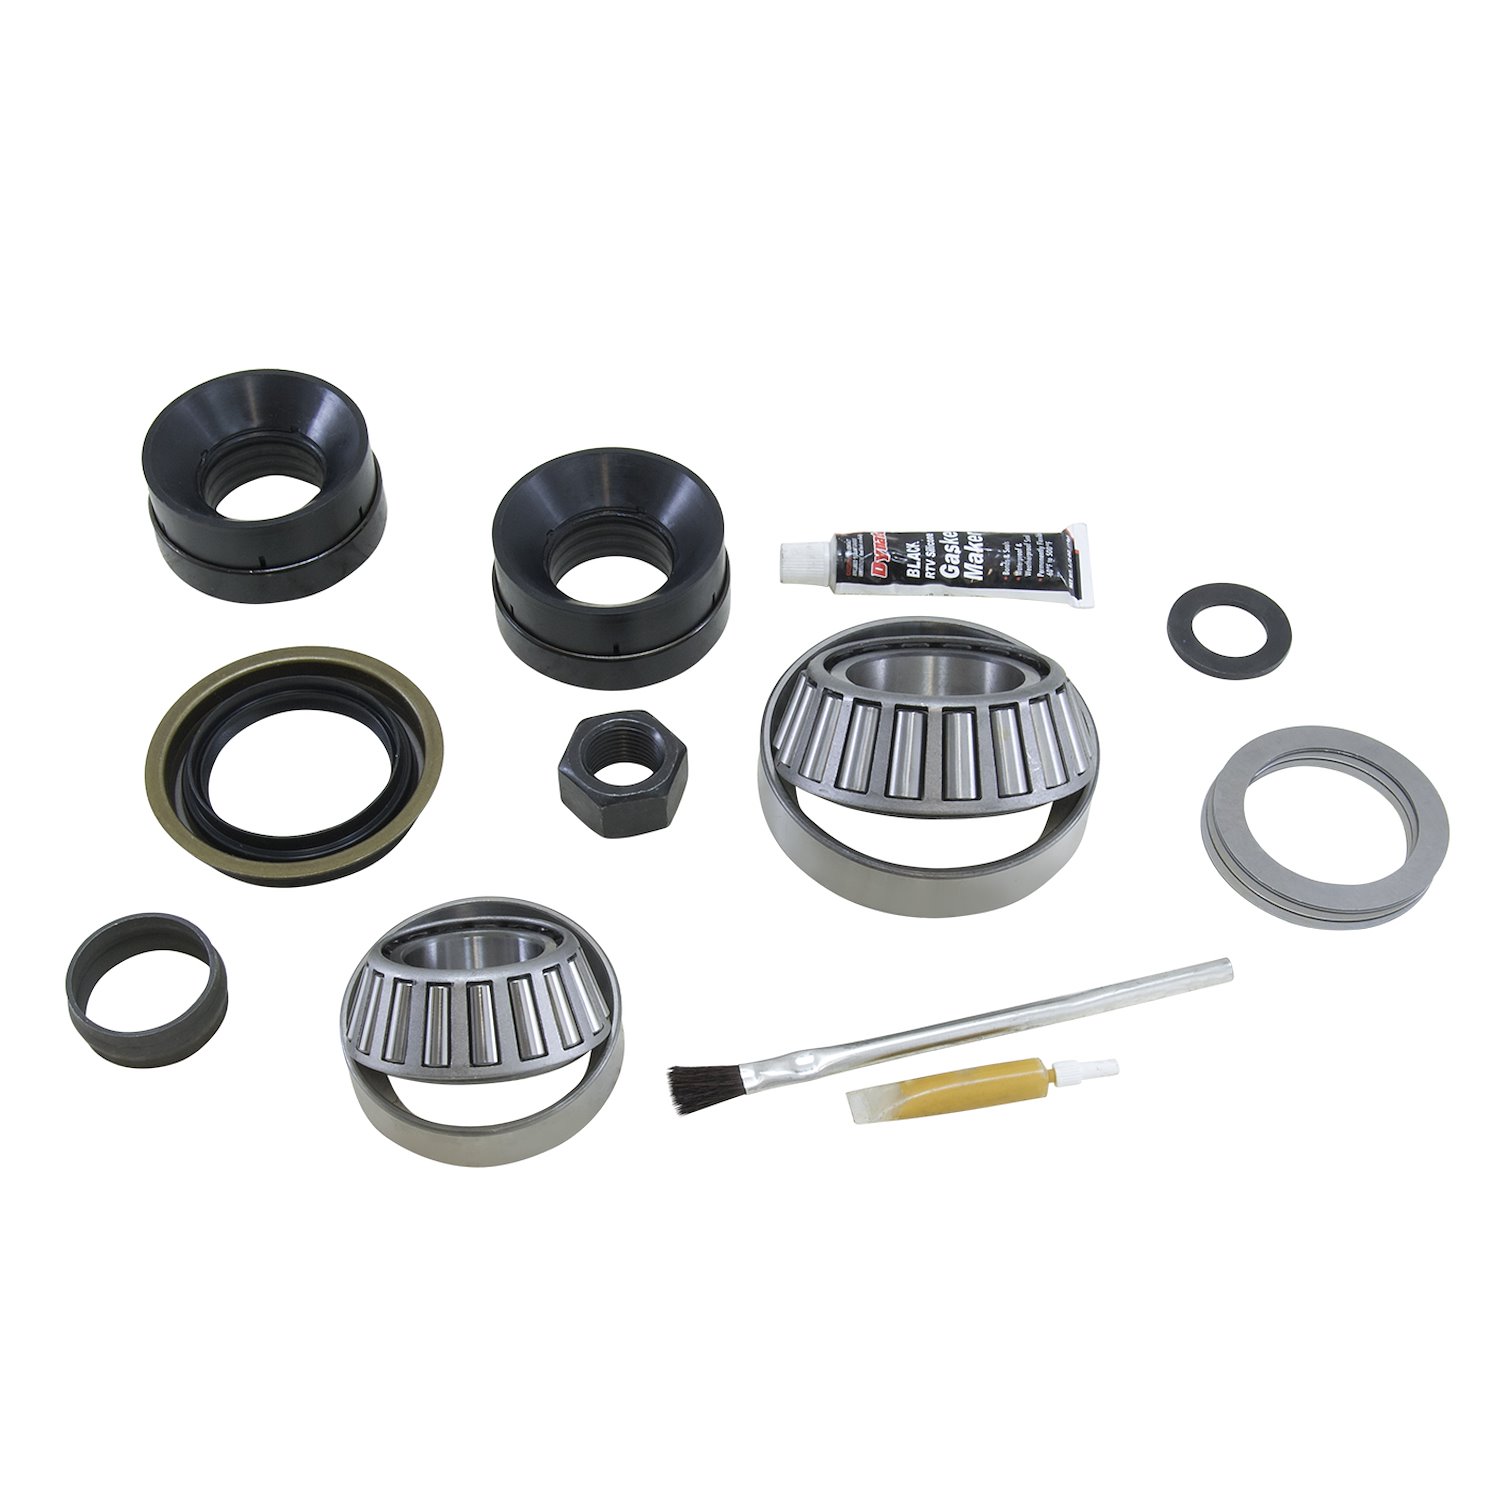 USA Standard ZK C9.25-F Master Overhaul Kit, For The Chrysler 9.25 in. Front Differential